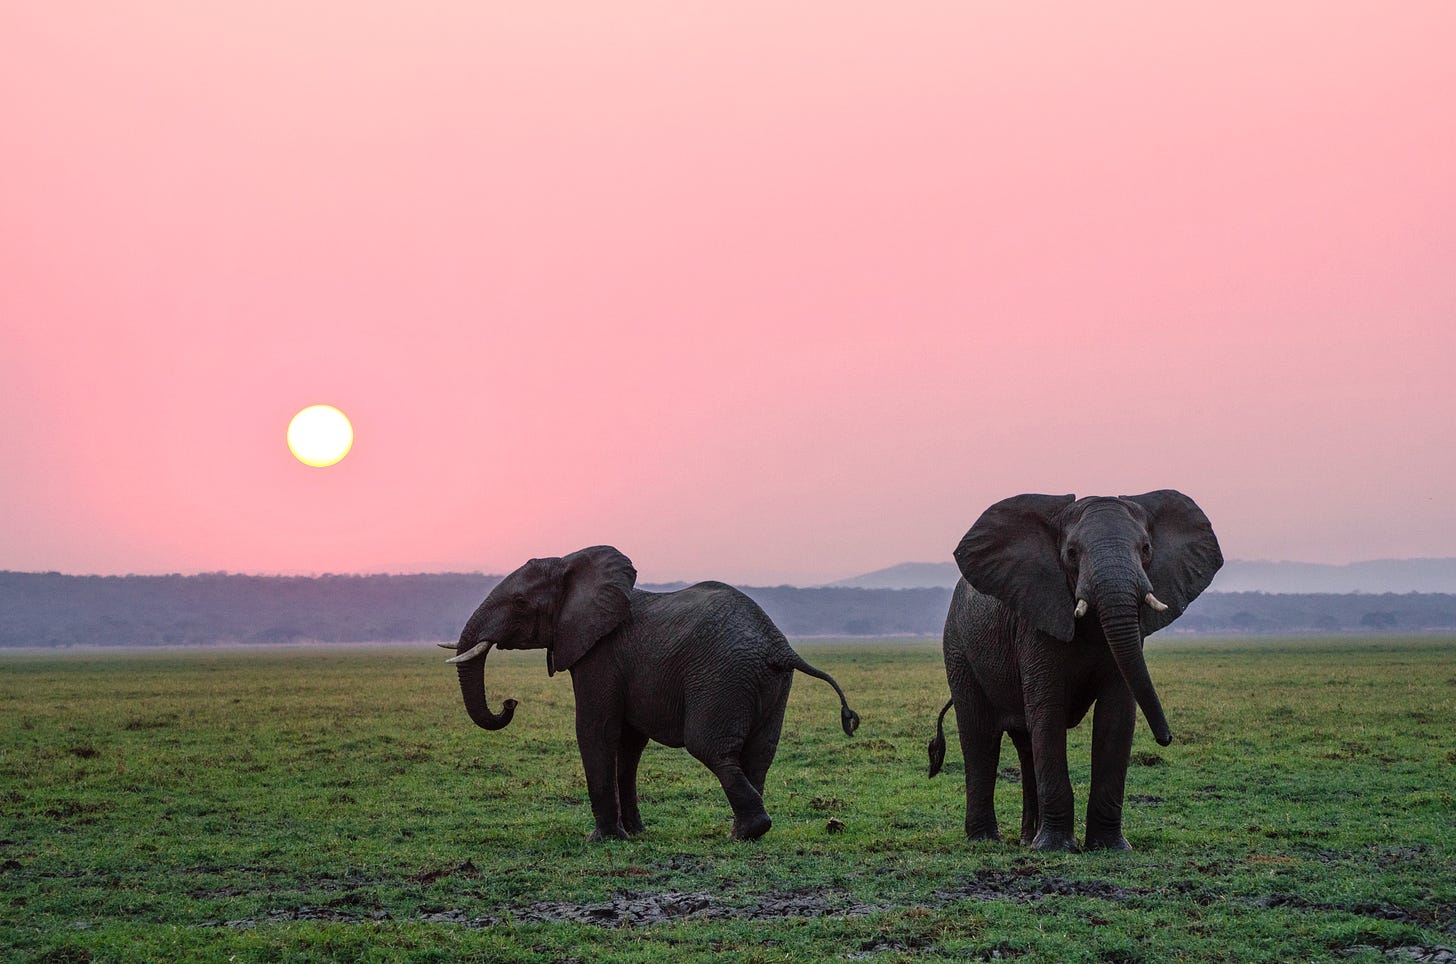 Two elephants and a sunset